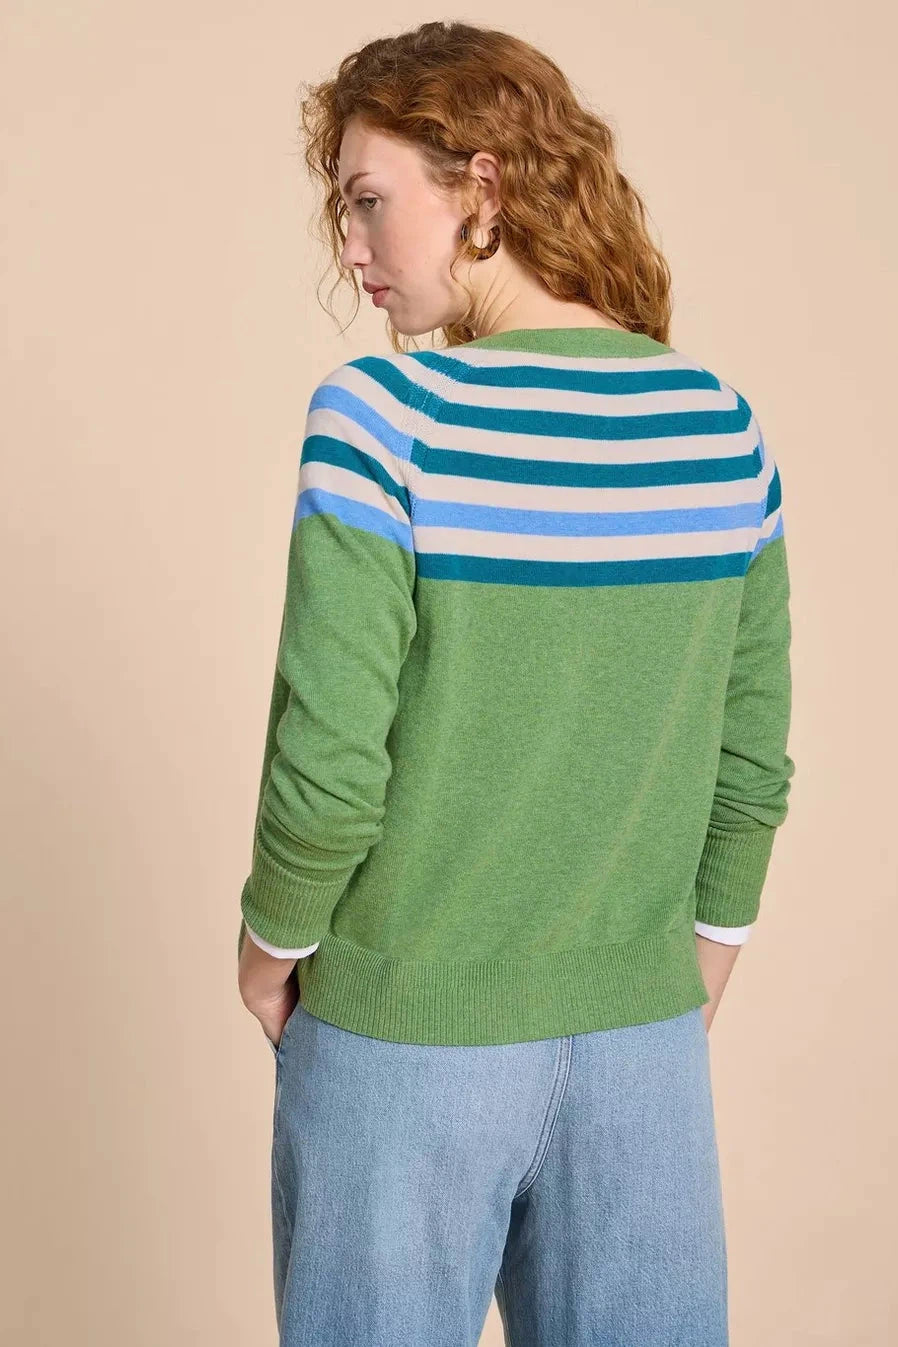 White Stuff Lulu Cardigan in Green Multi-Womens-Ohh! By Gum - Shop Sustainable